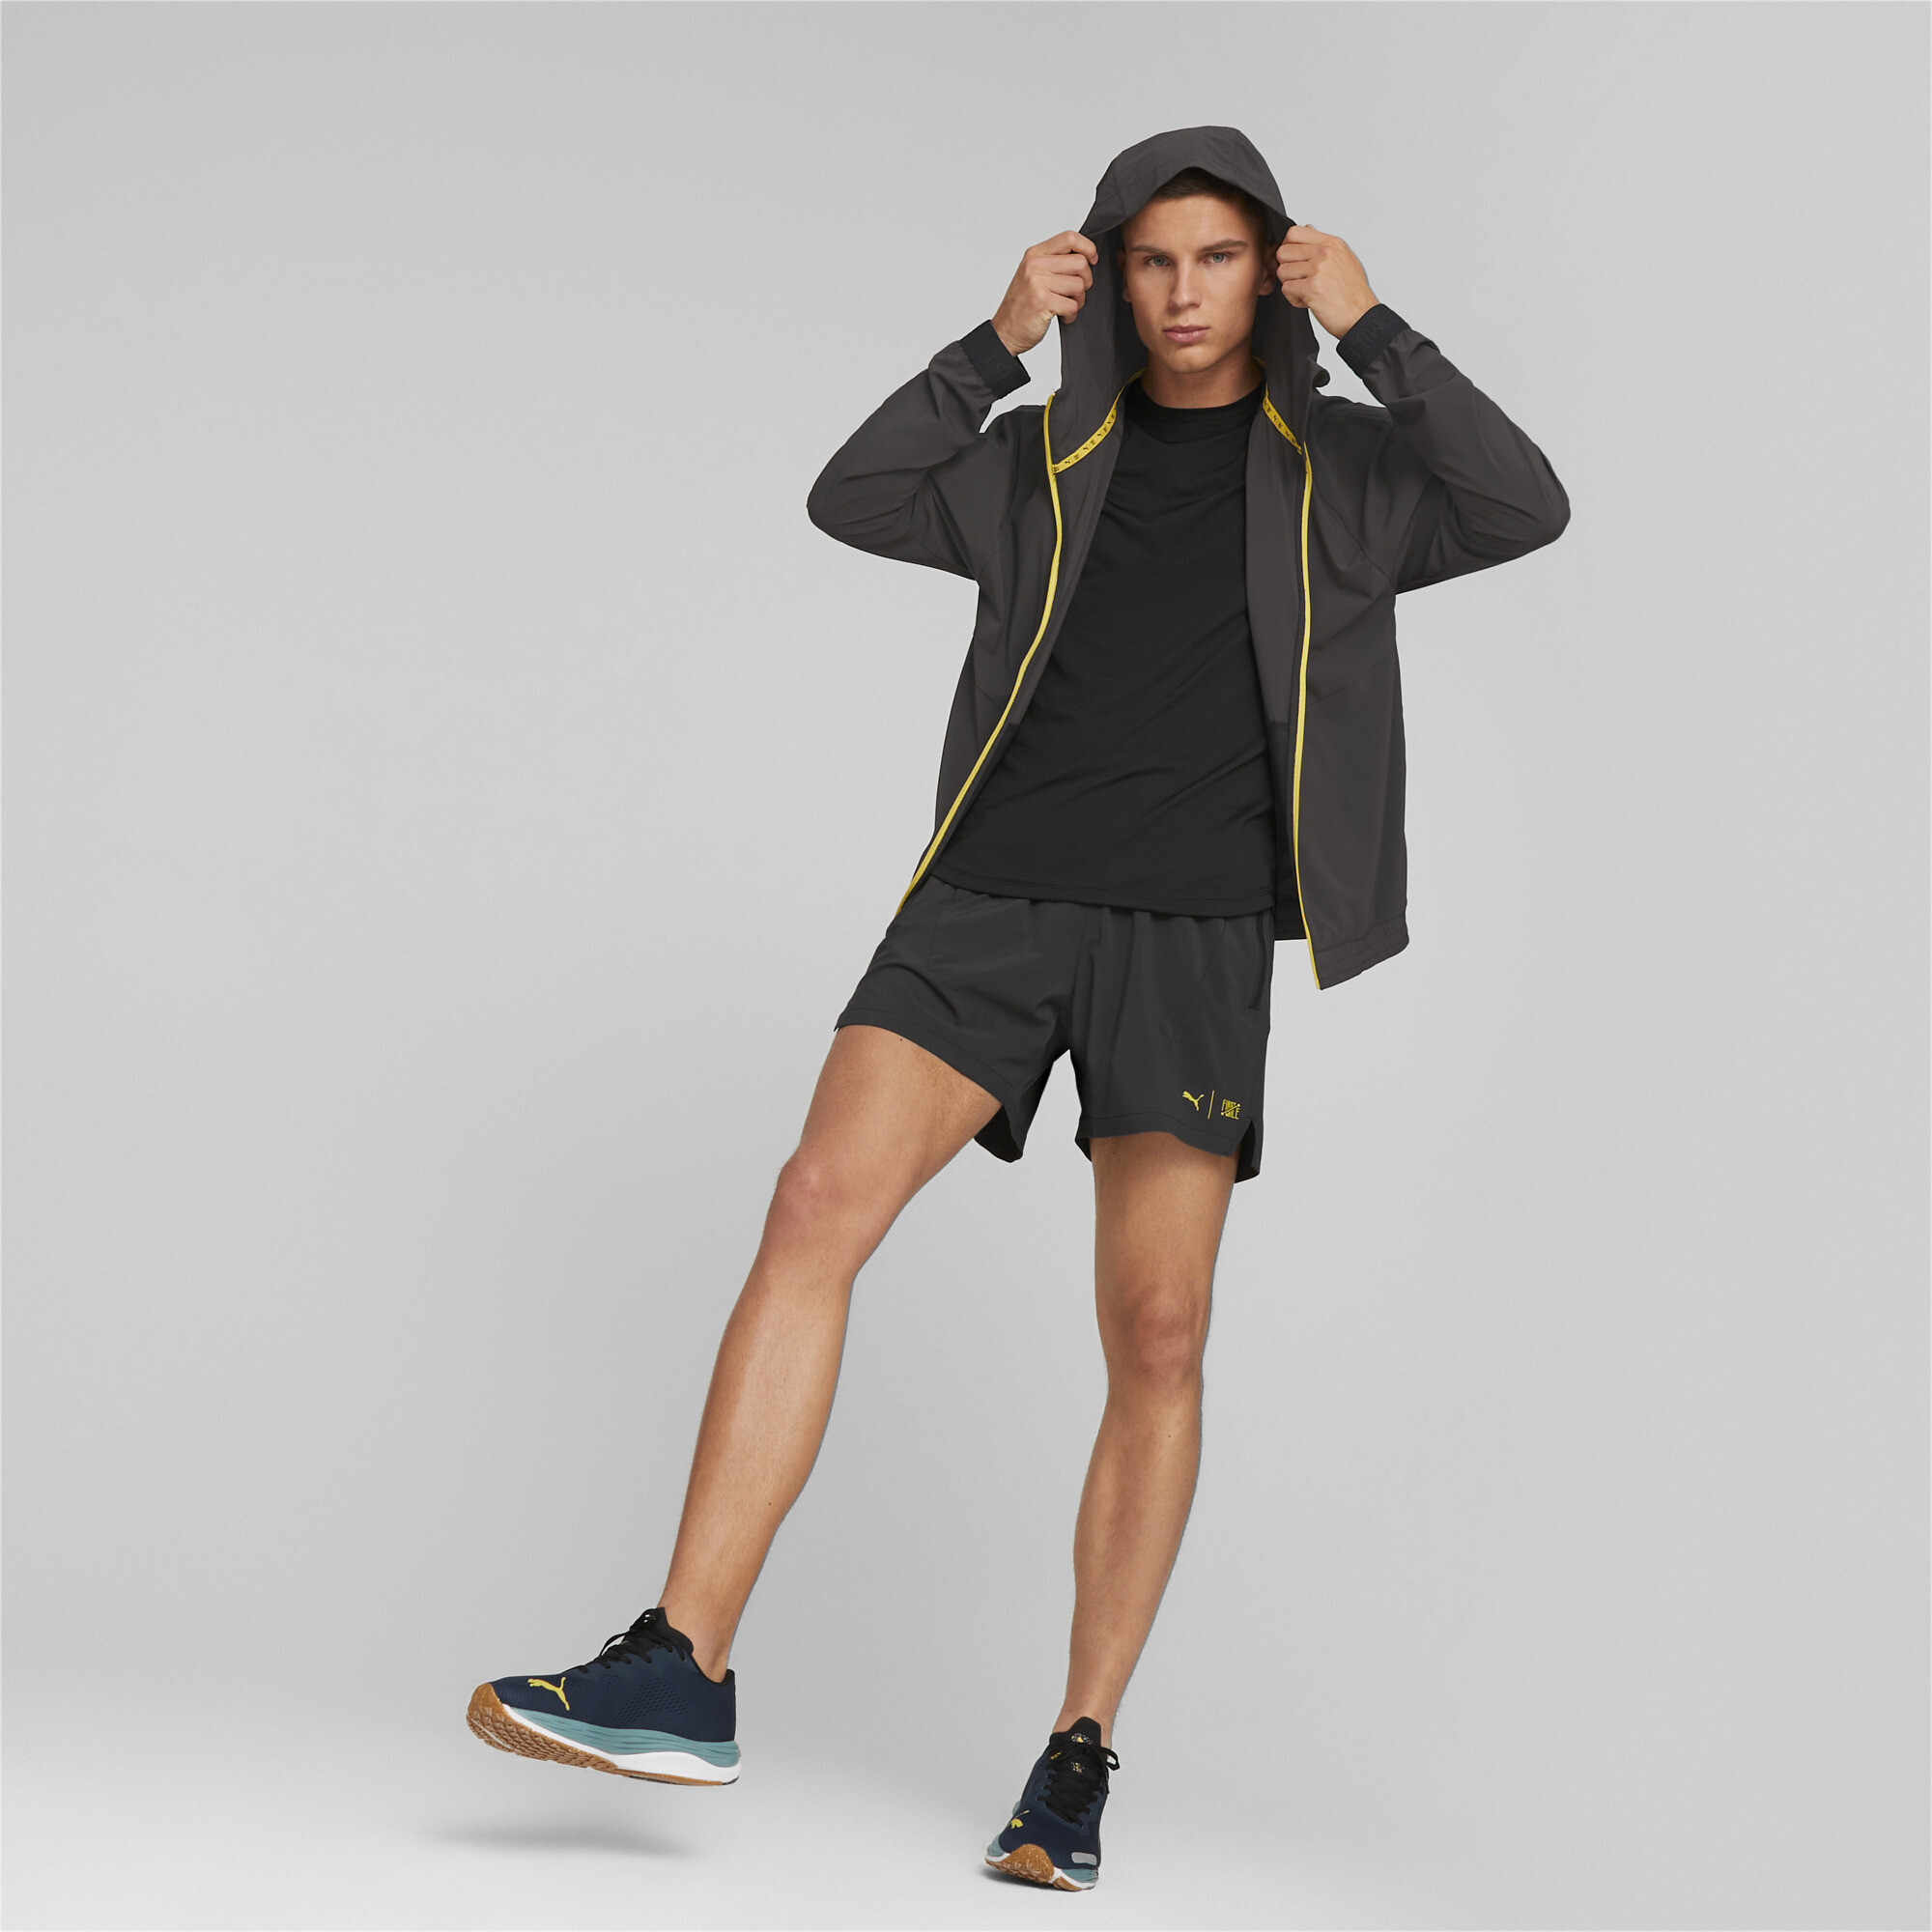 Men's PUMA X First Mile Woven 5 Running Shorts Men In Black, Size Small